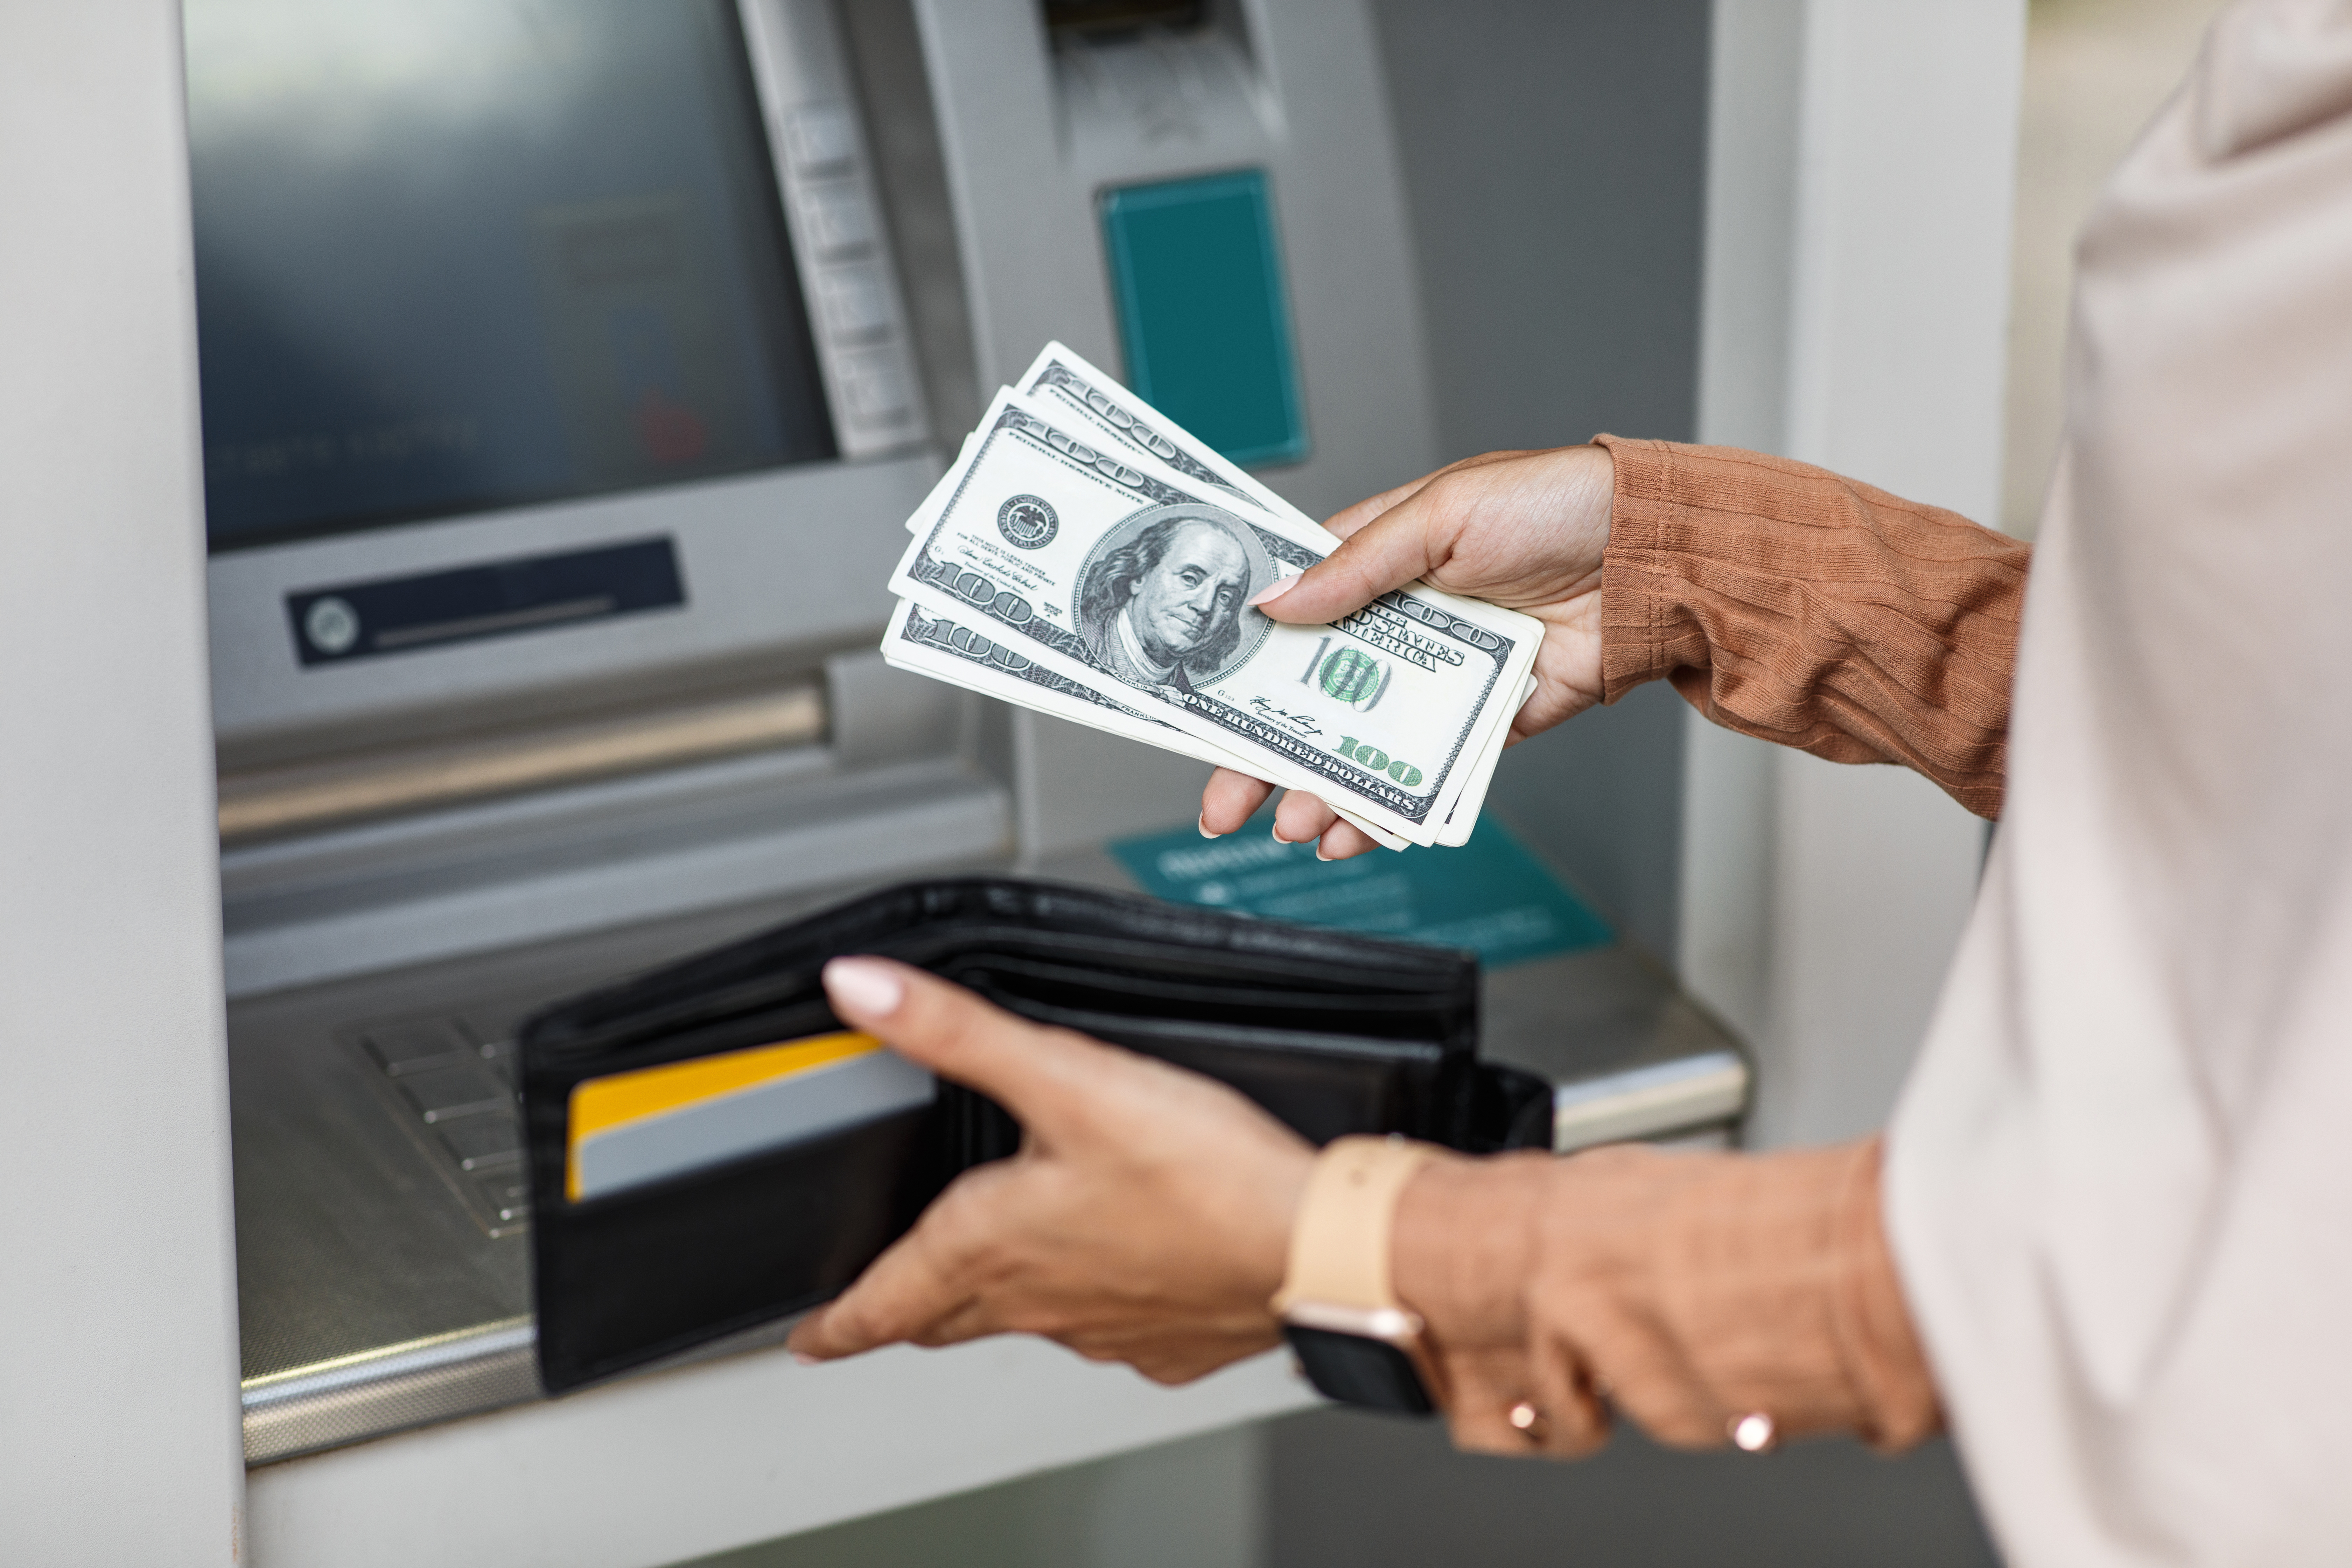 How the ATM Industry Evolved - A Brief History - ATM Advantage